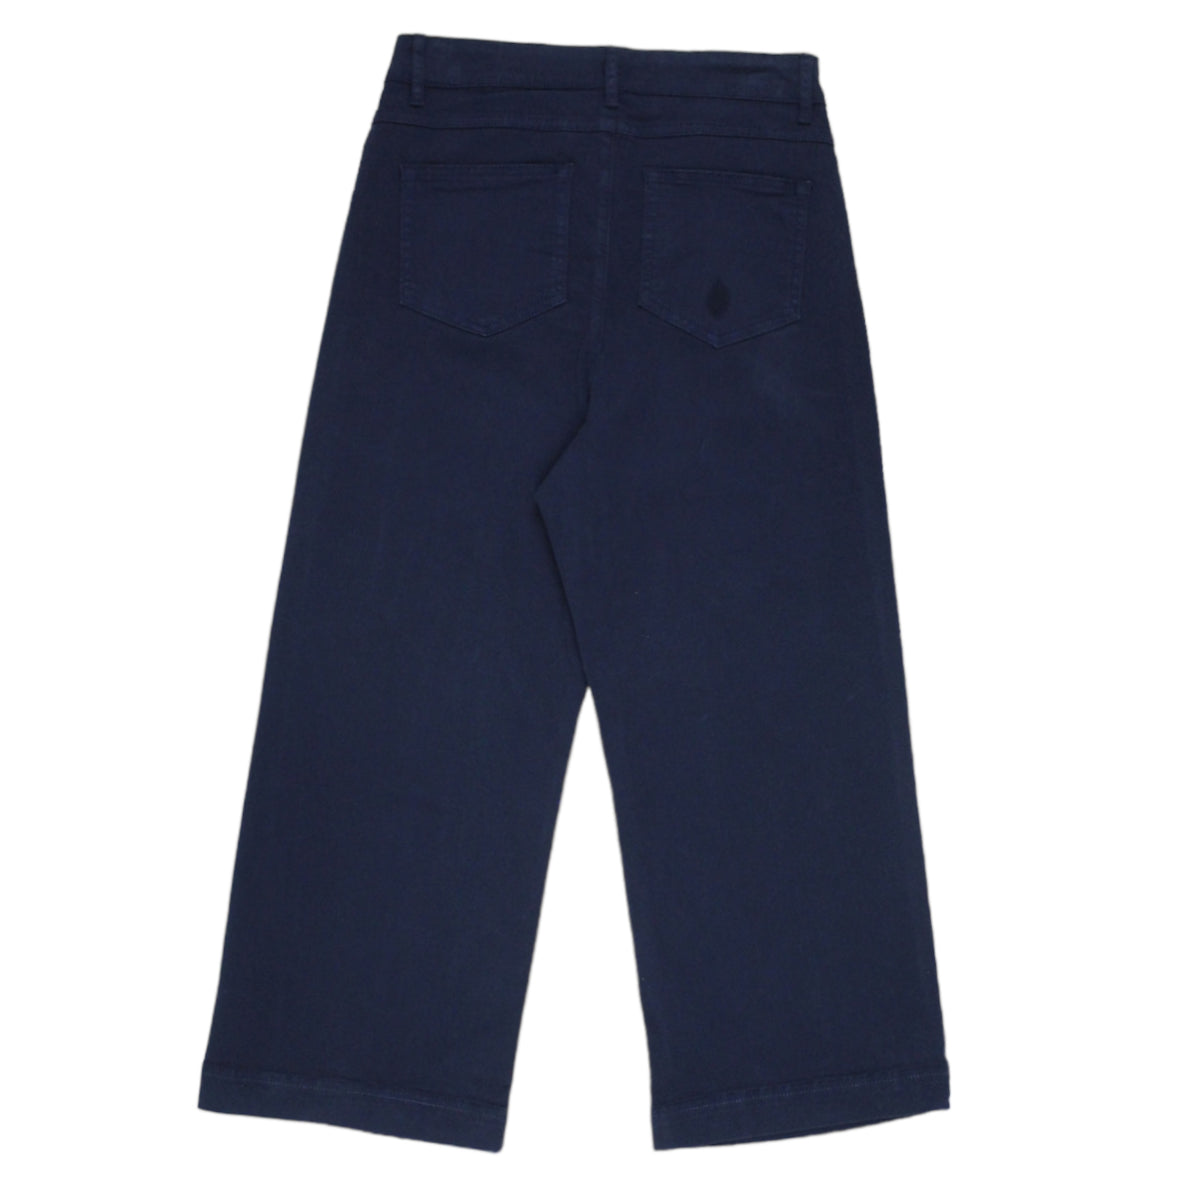 NRBY Navy Cropped Chino's - Sample